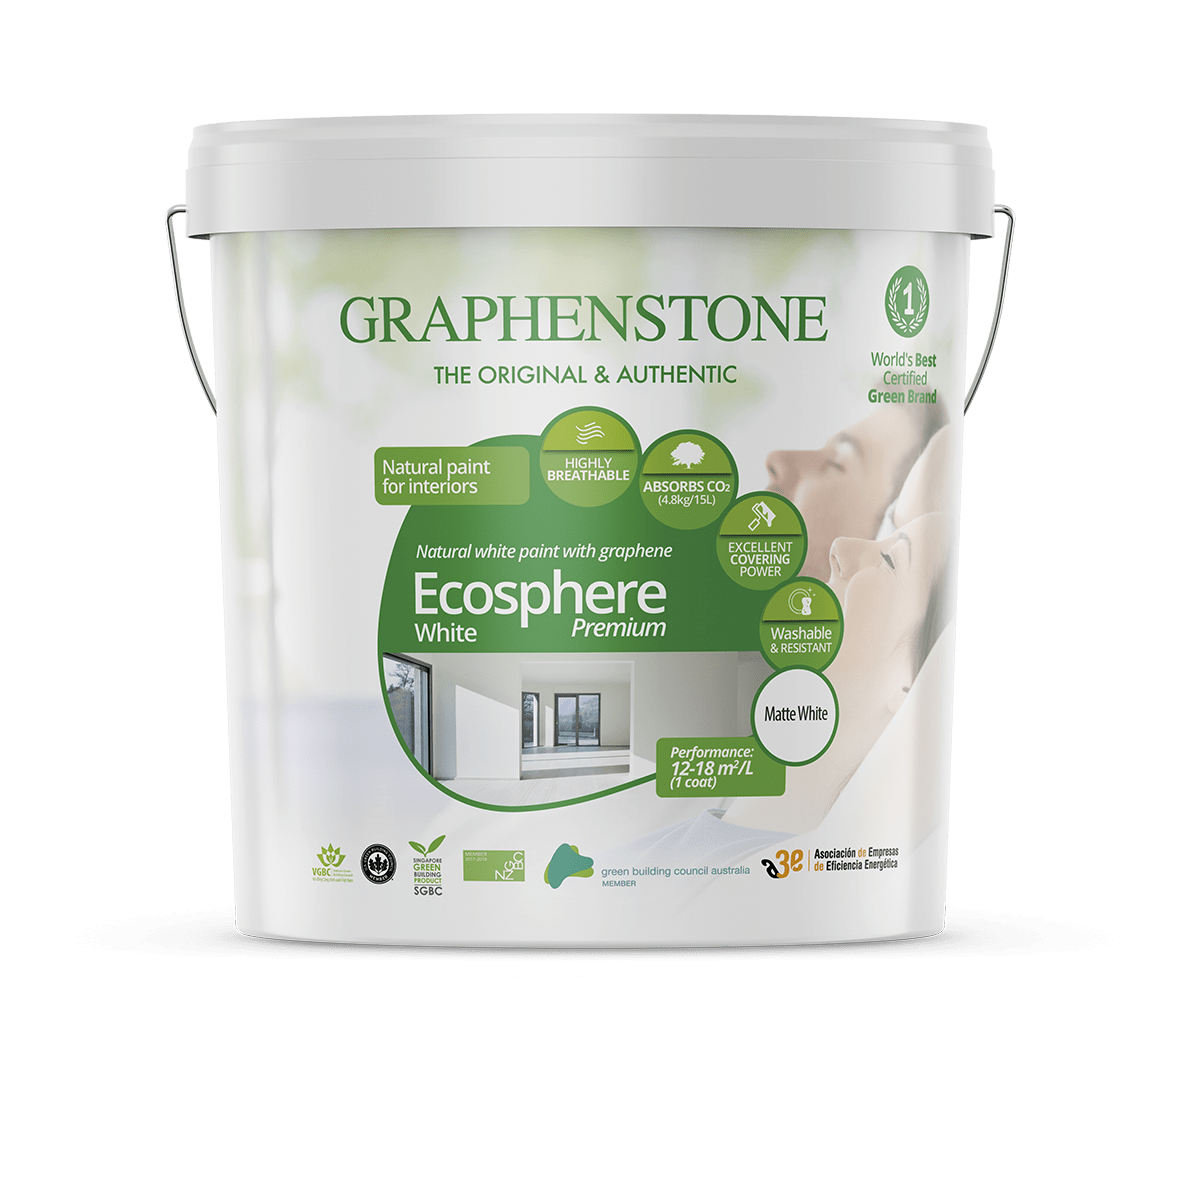 Ecosphere White - Natural lime paint for interiors